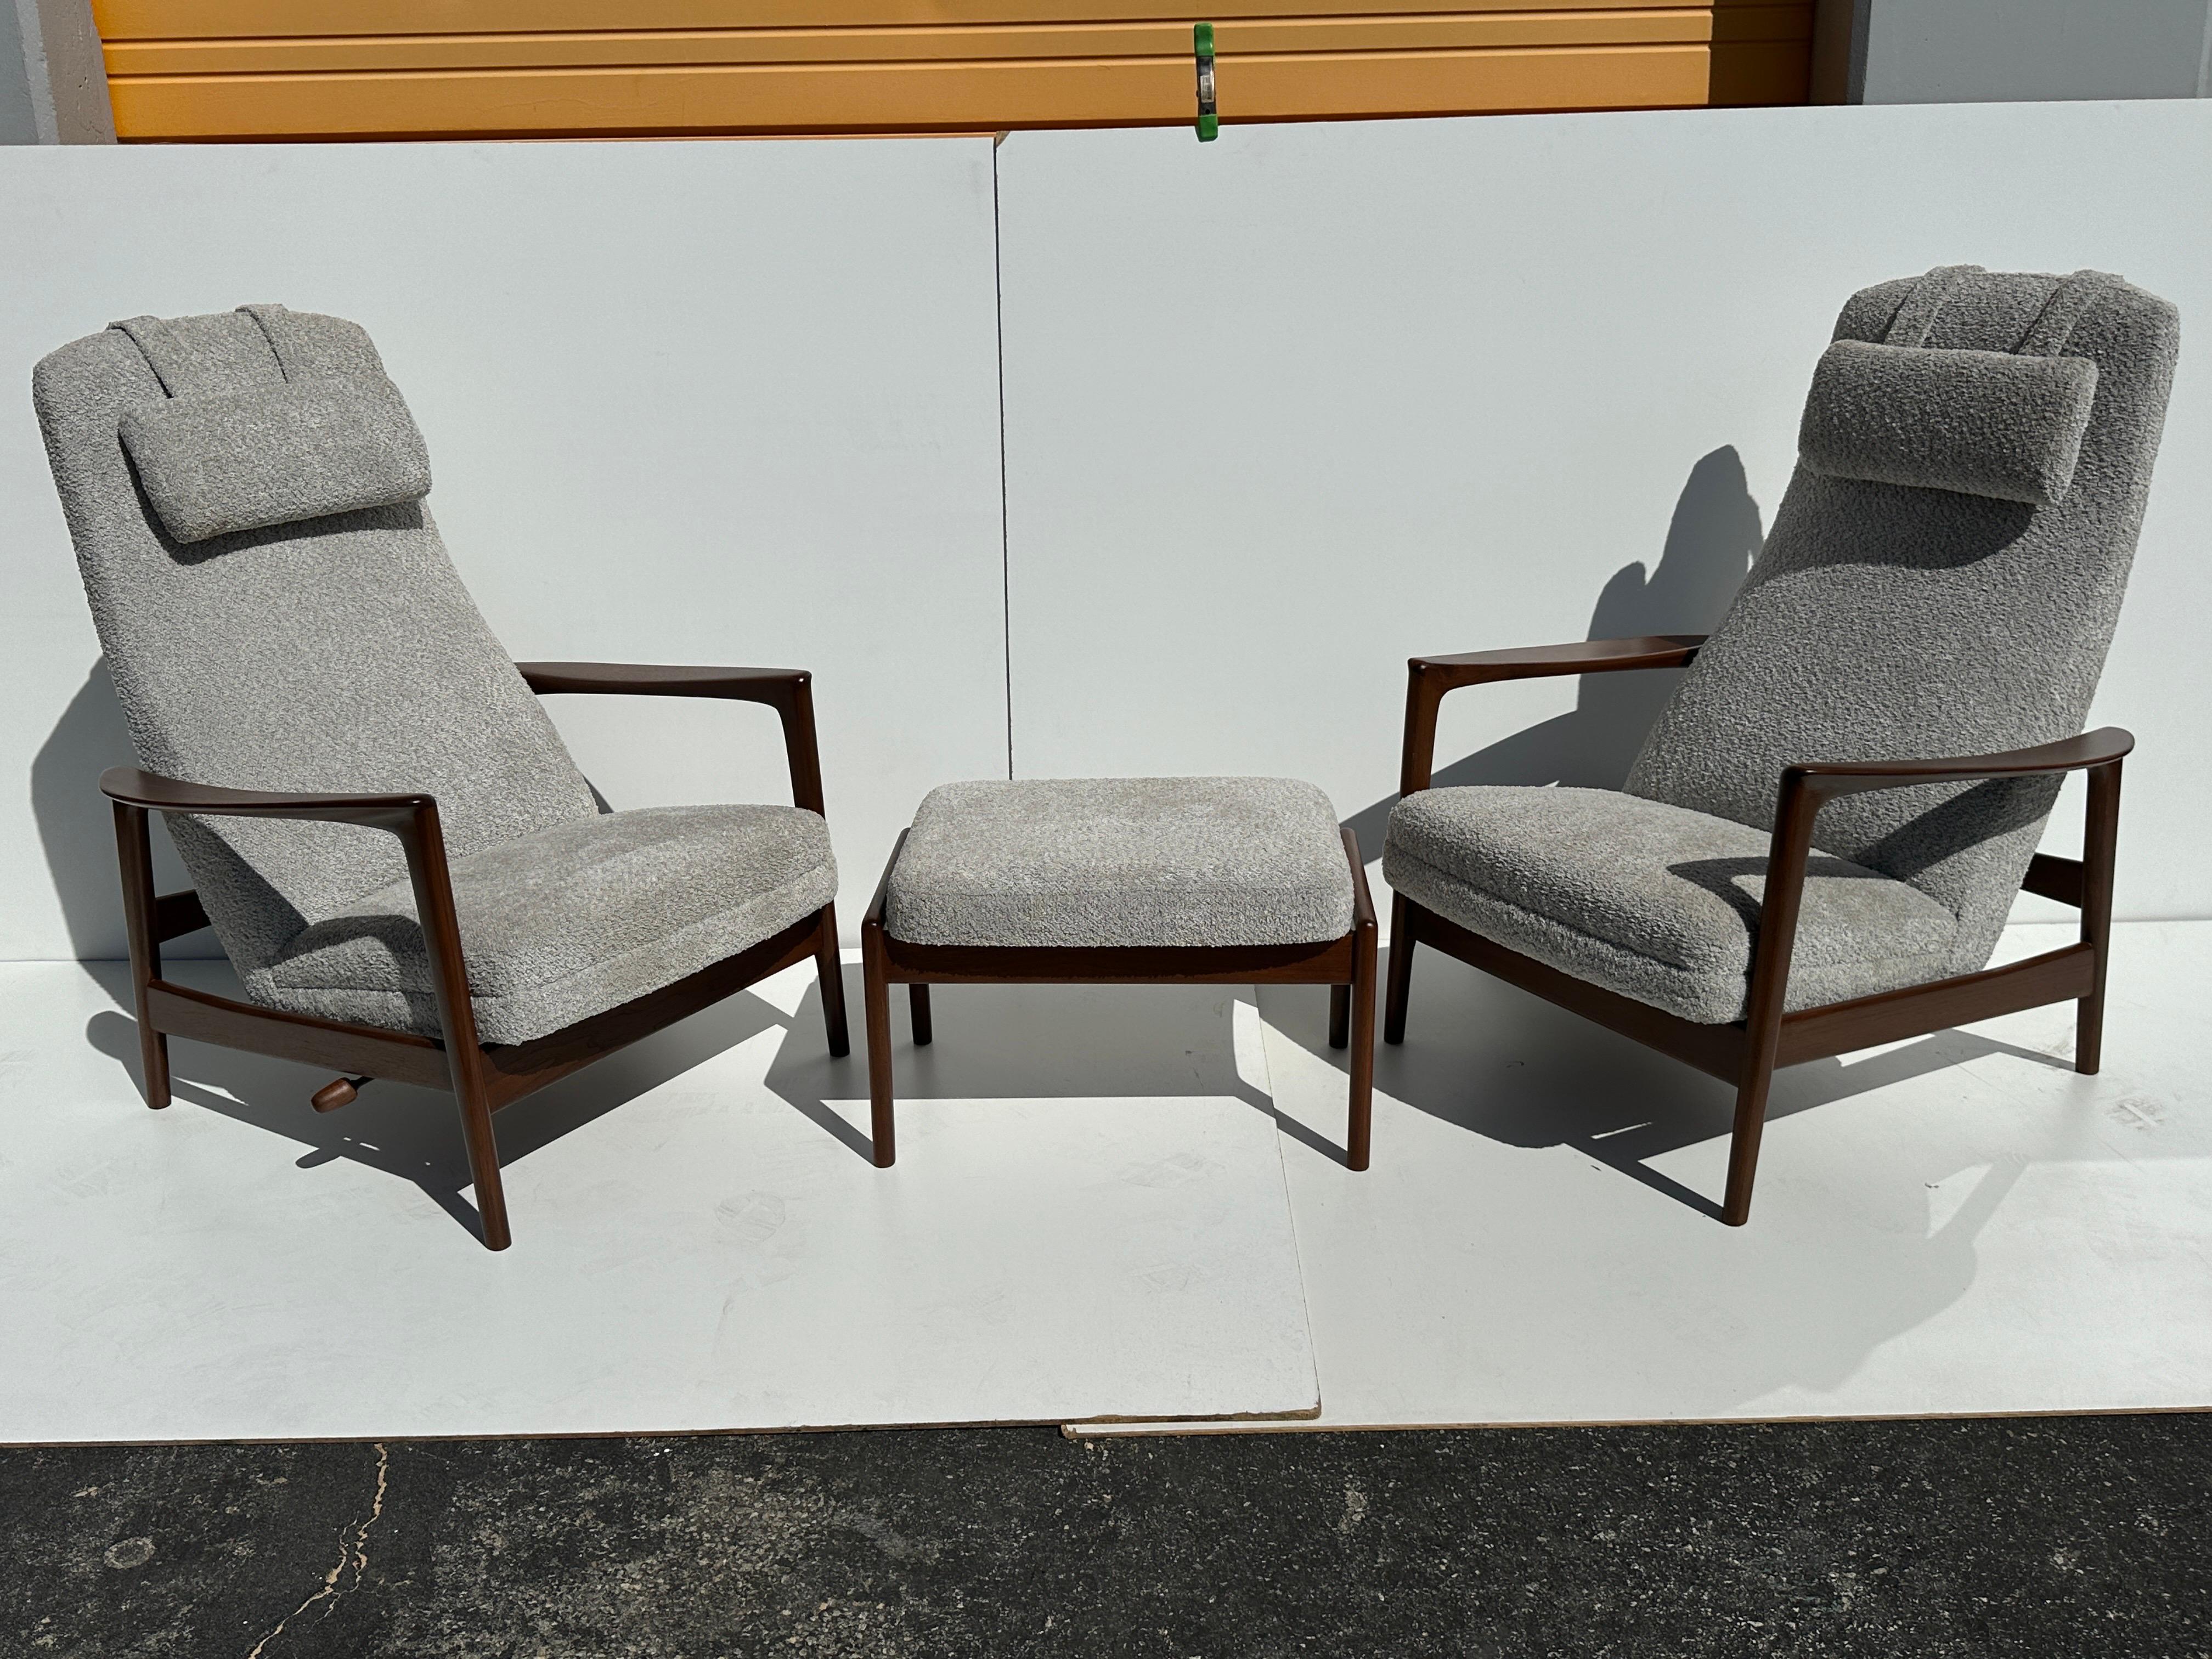 Set of two adjustable reclining lounge chairs and footrest newly upholstered in boucle type of fabric for DUX of Sweden. Frames are made of dark walnut and been refinished. Each chair is 40